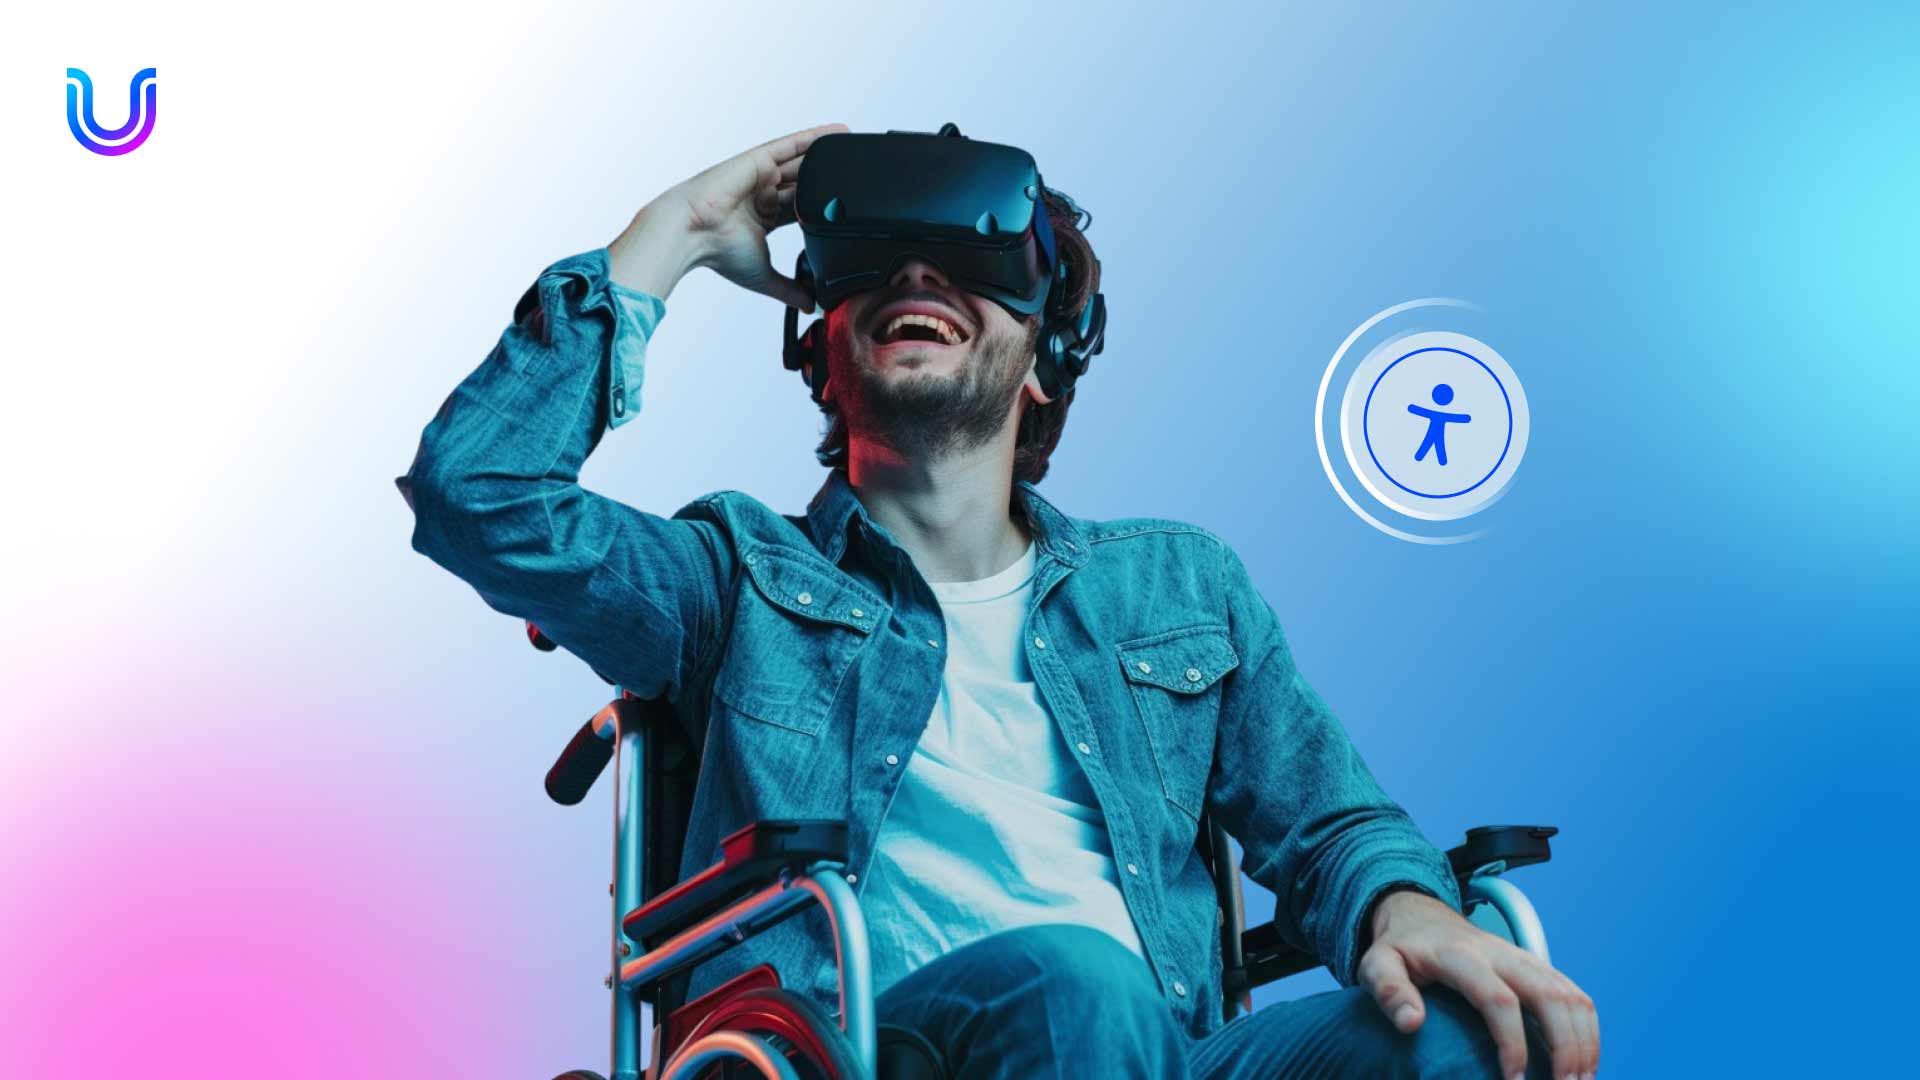 A whole new world: the virtual reality experience made accessible